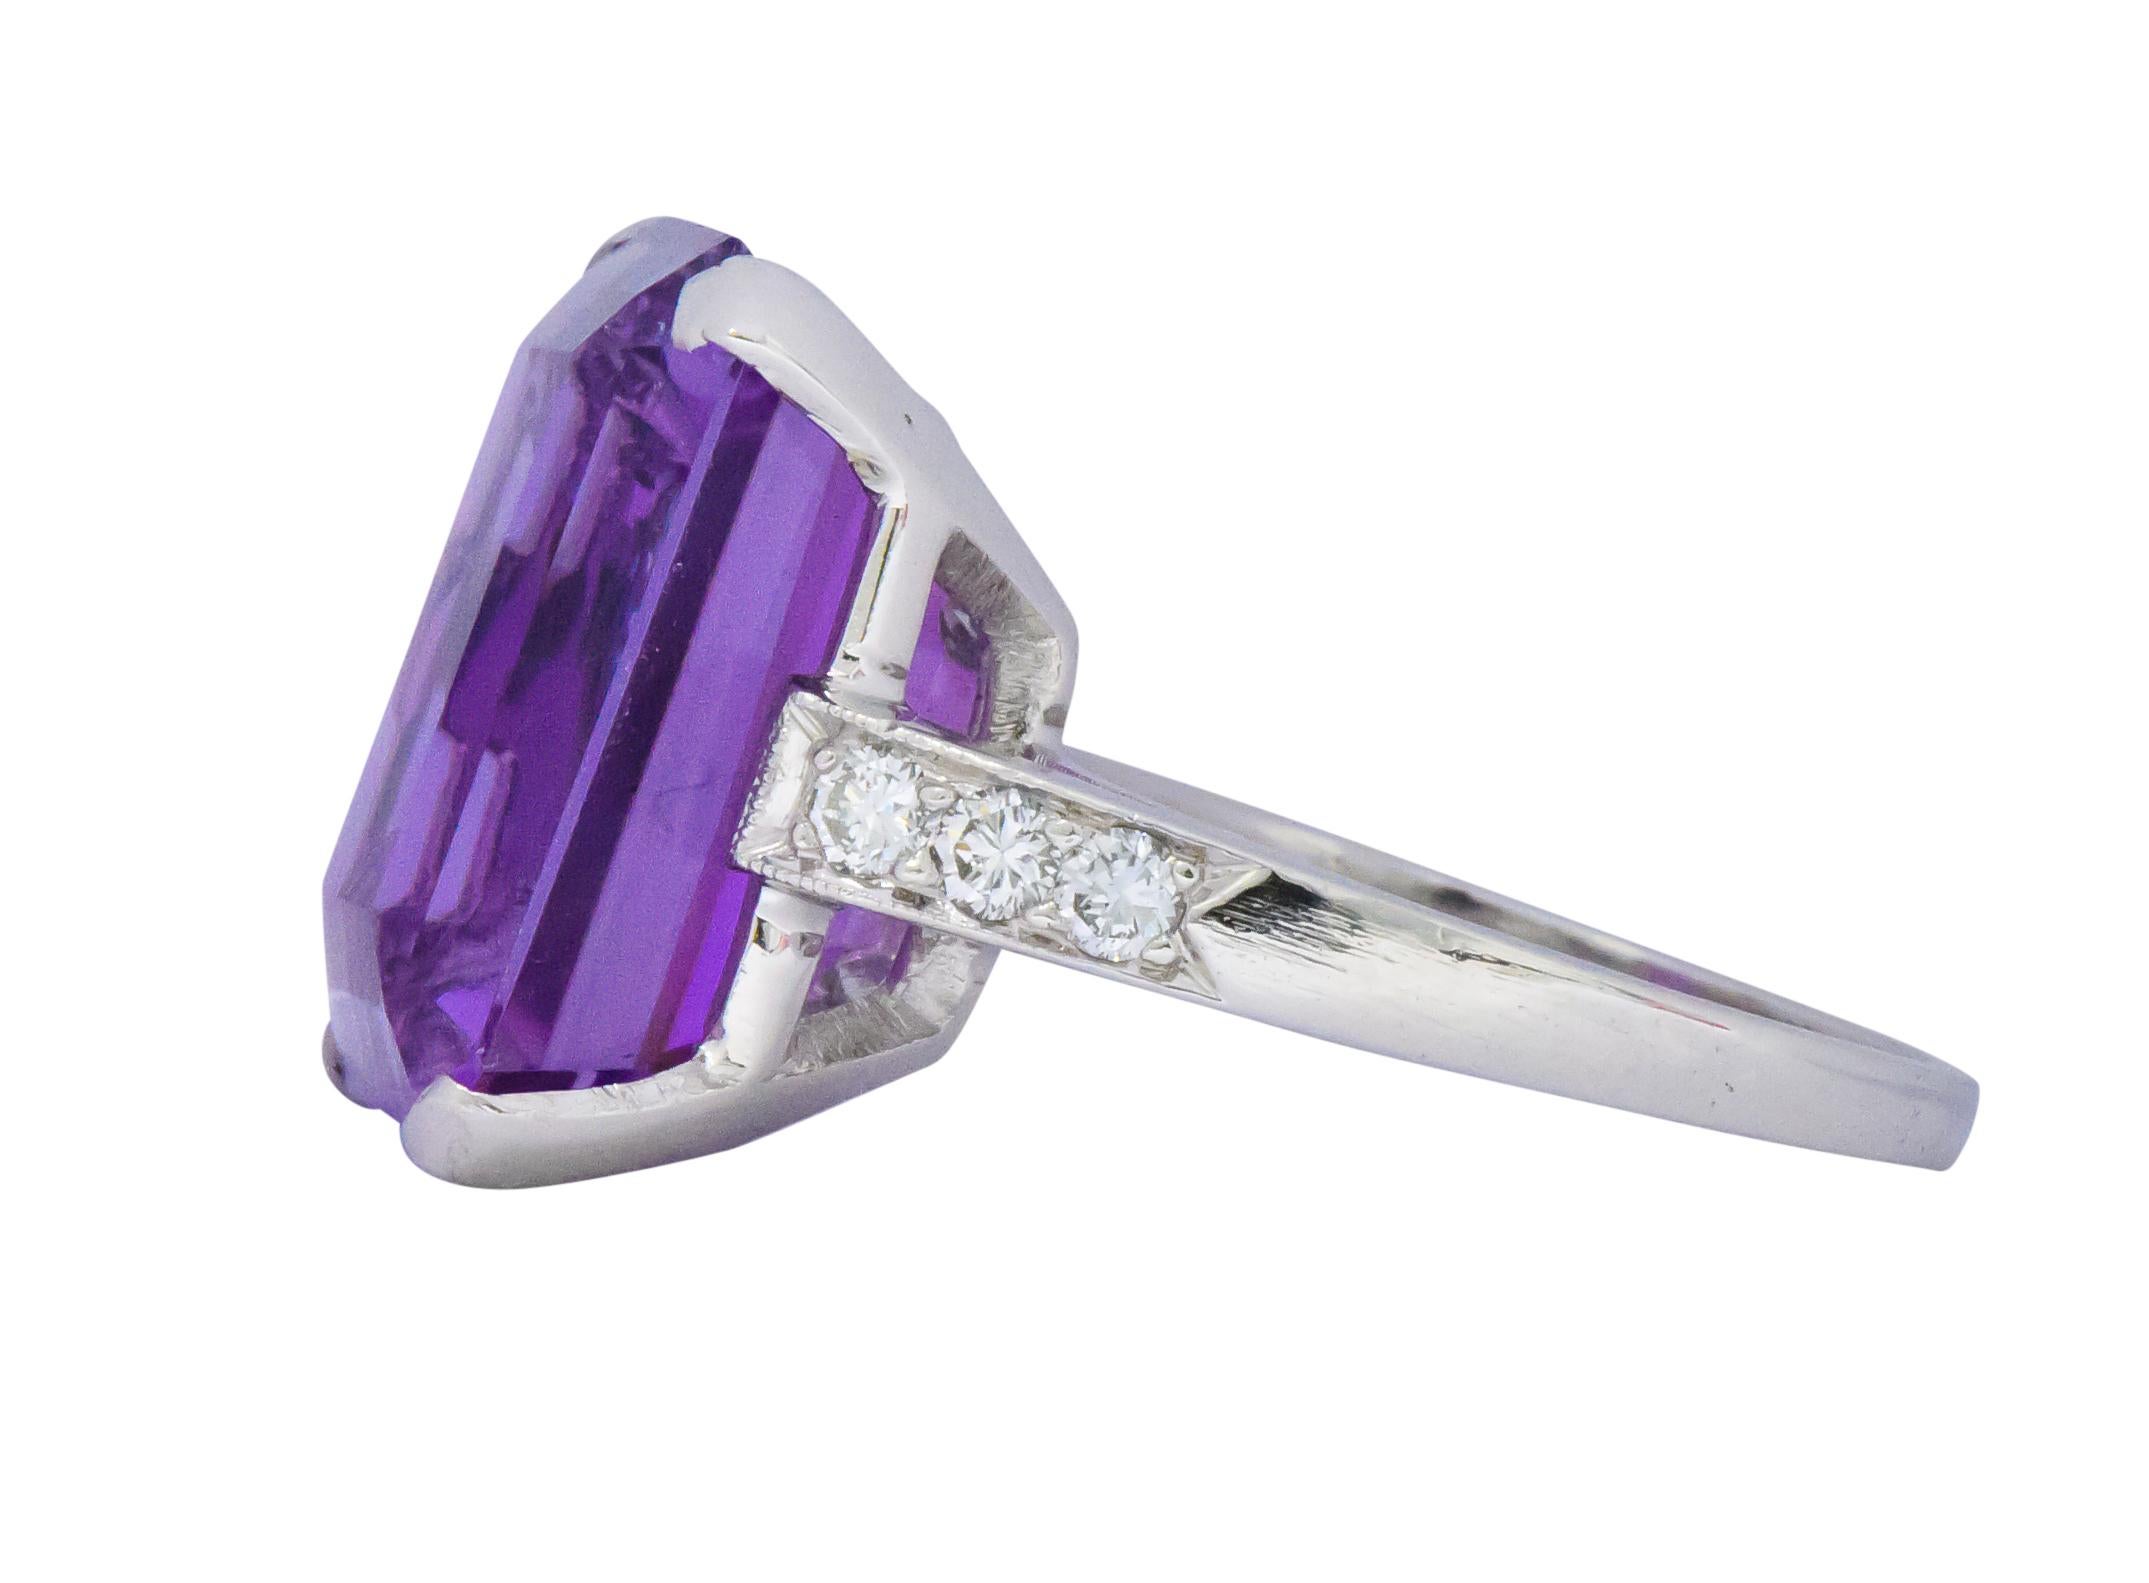 Centering a basket set emerald cut amethyst weighing approximately 10.75 carats, transparent and a bright purple color

Flanked by round brilliant cut diamonds, bead set into shoulders, weighing approximately 0.25 carat total; eye-clean and white 